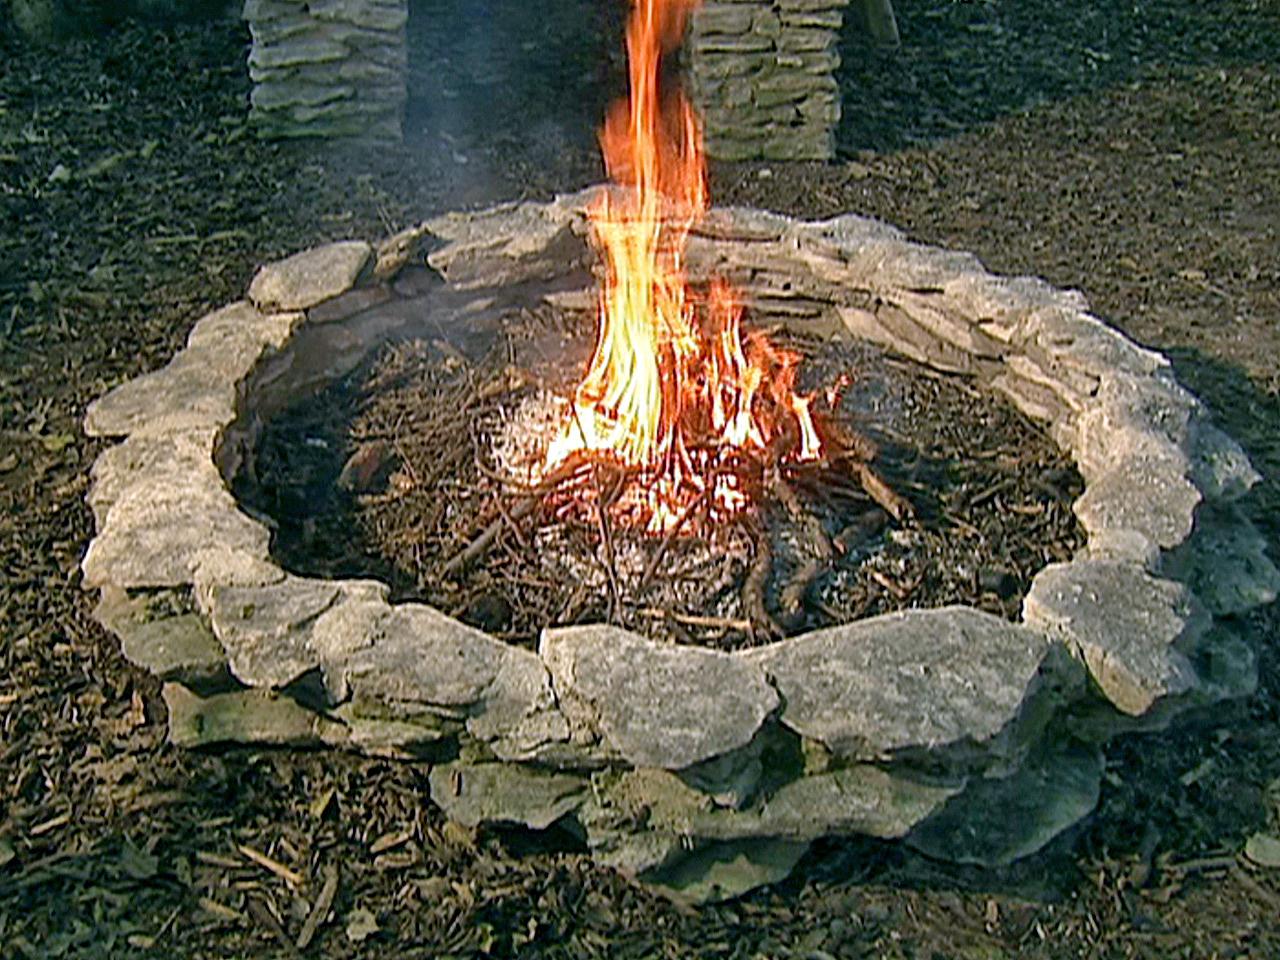 Outdoor Fire Pits And Pit Safety, State Park Fire Pit Rings